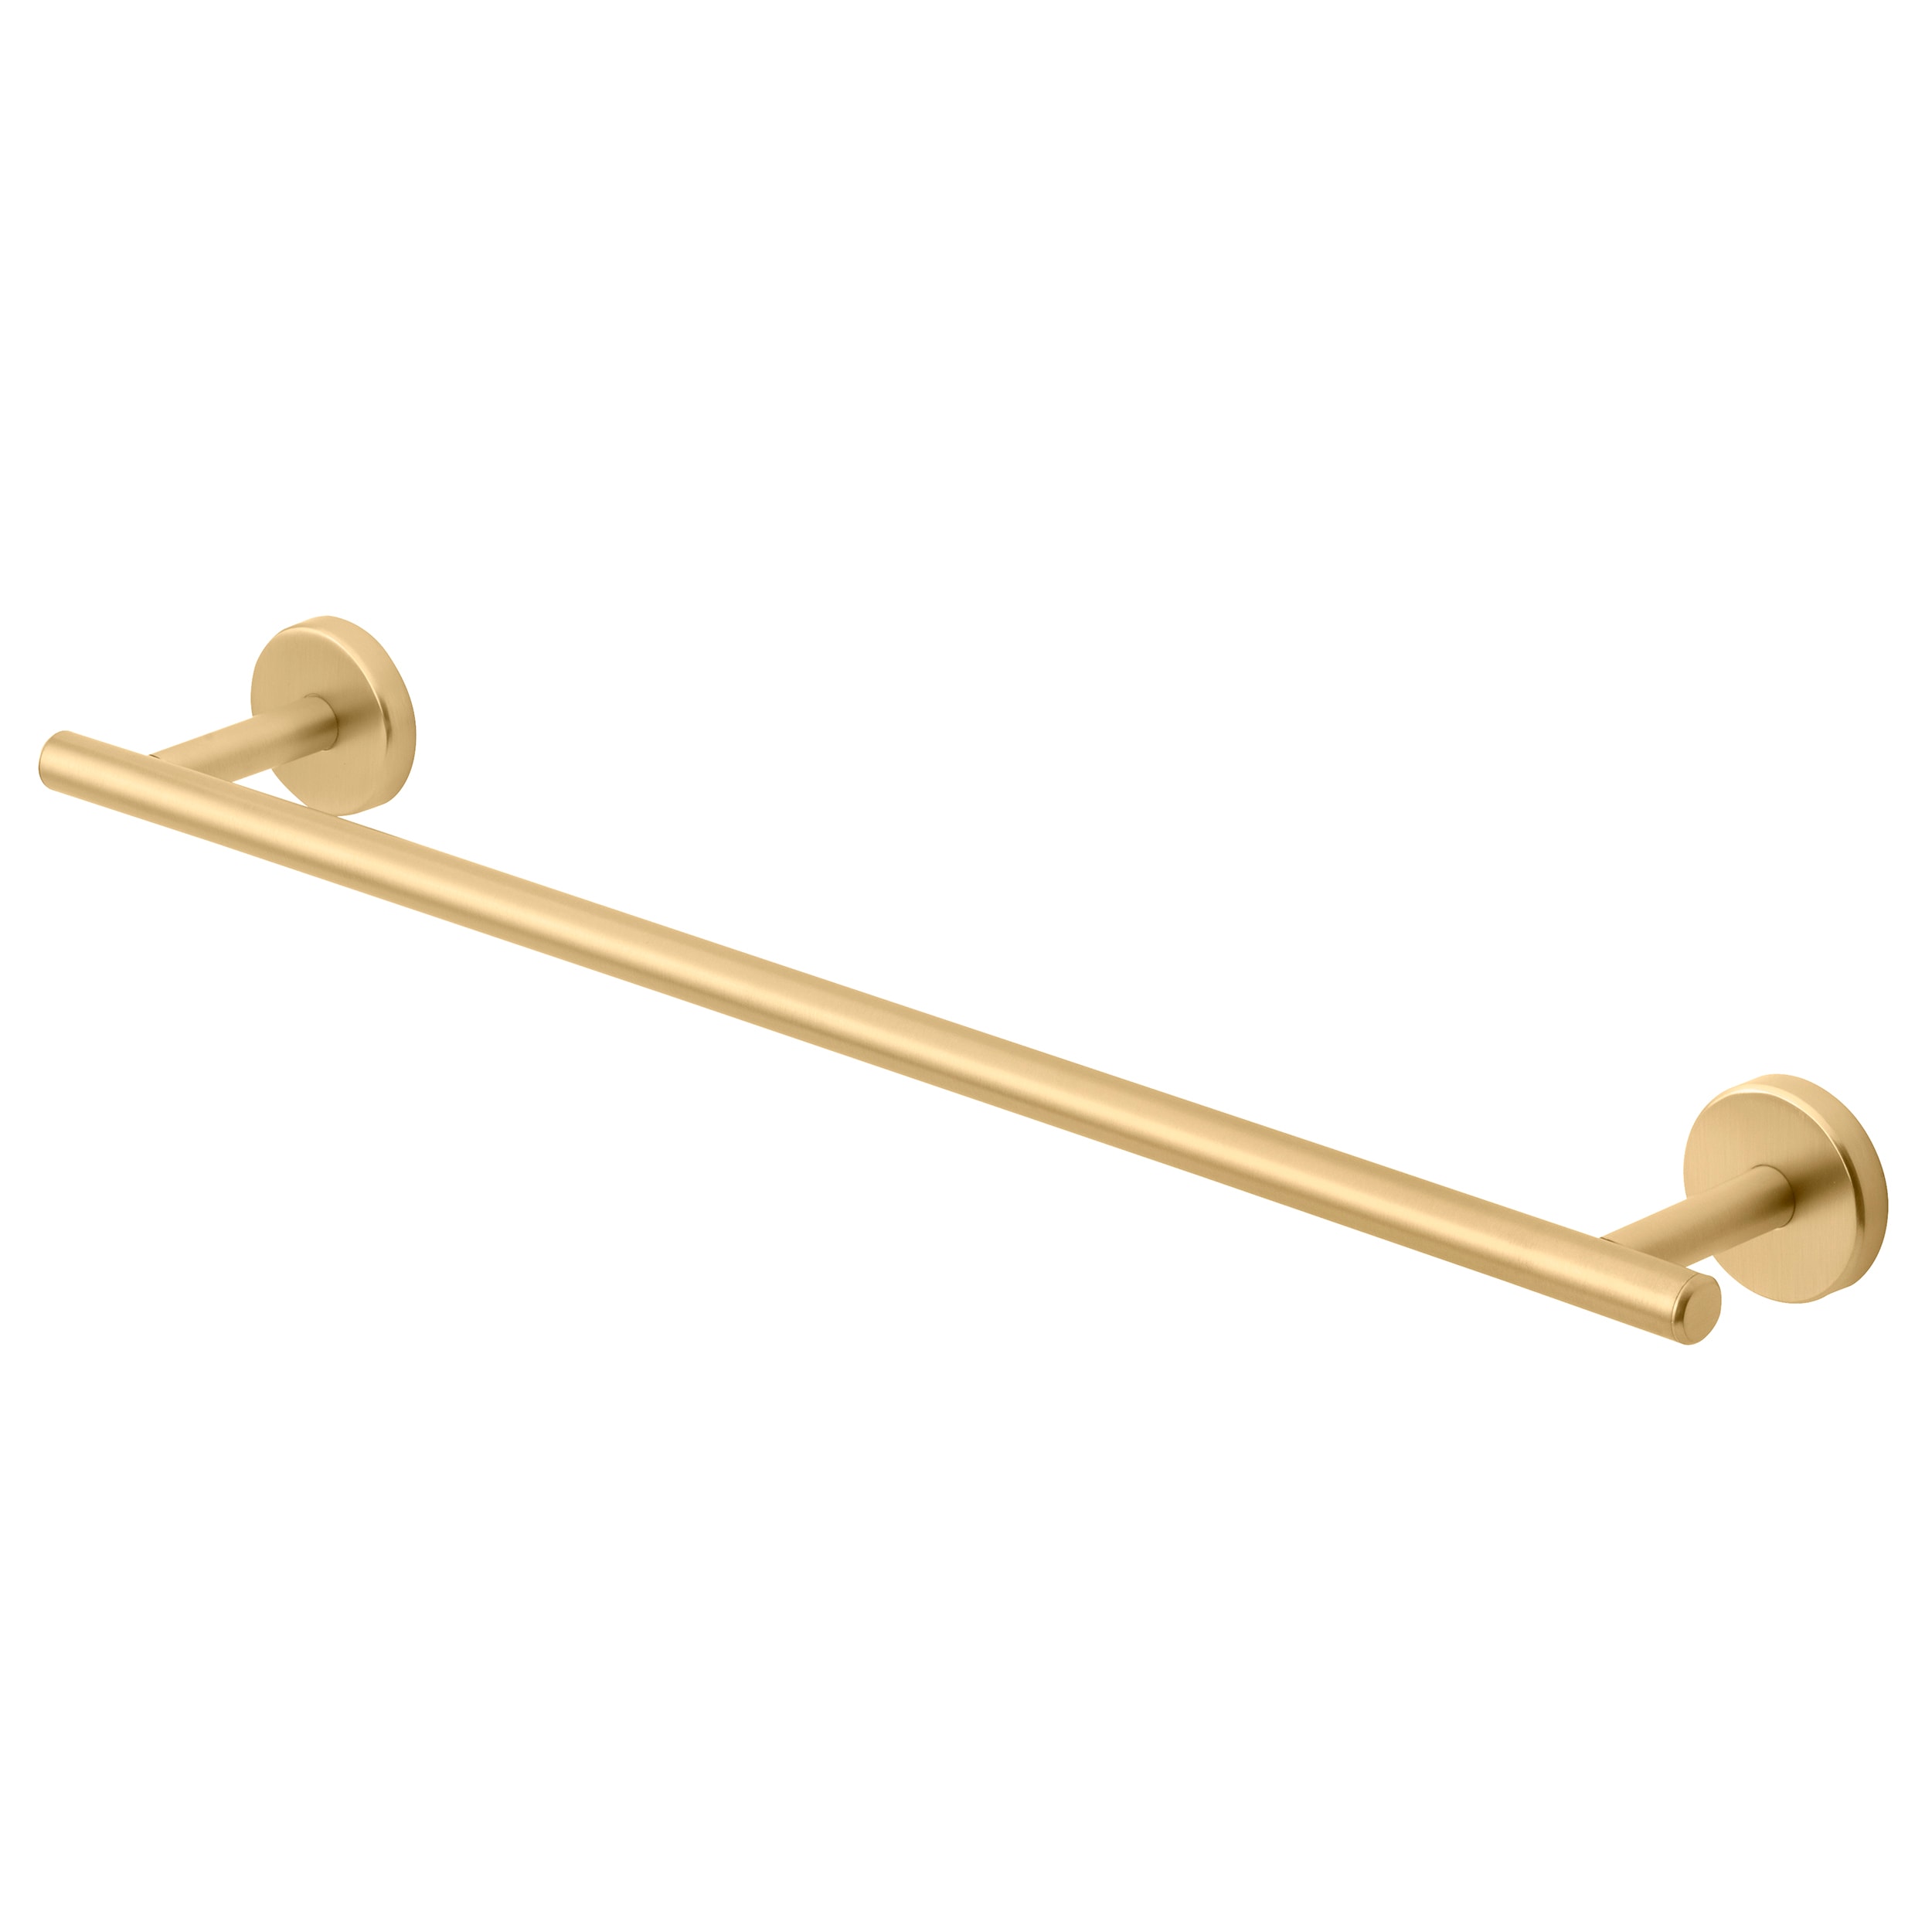 Franklin Brass Maxted 18 in. Towel Bar in Brushed Nickel MAX18-SN